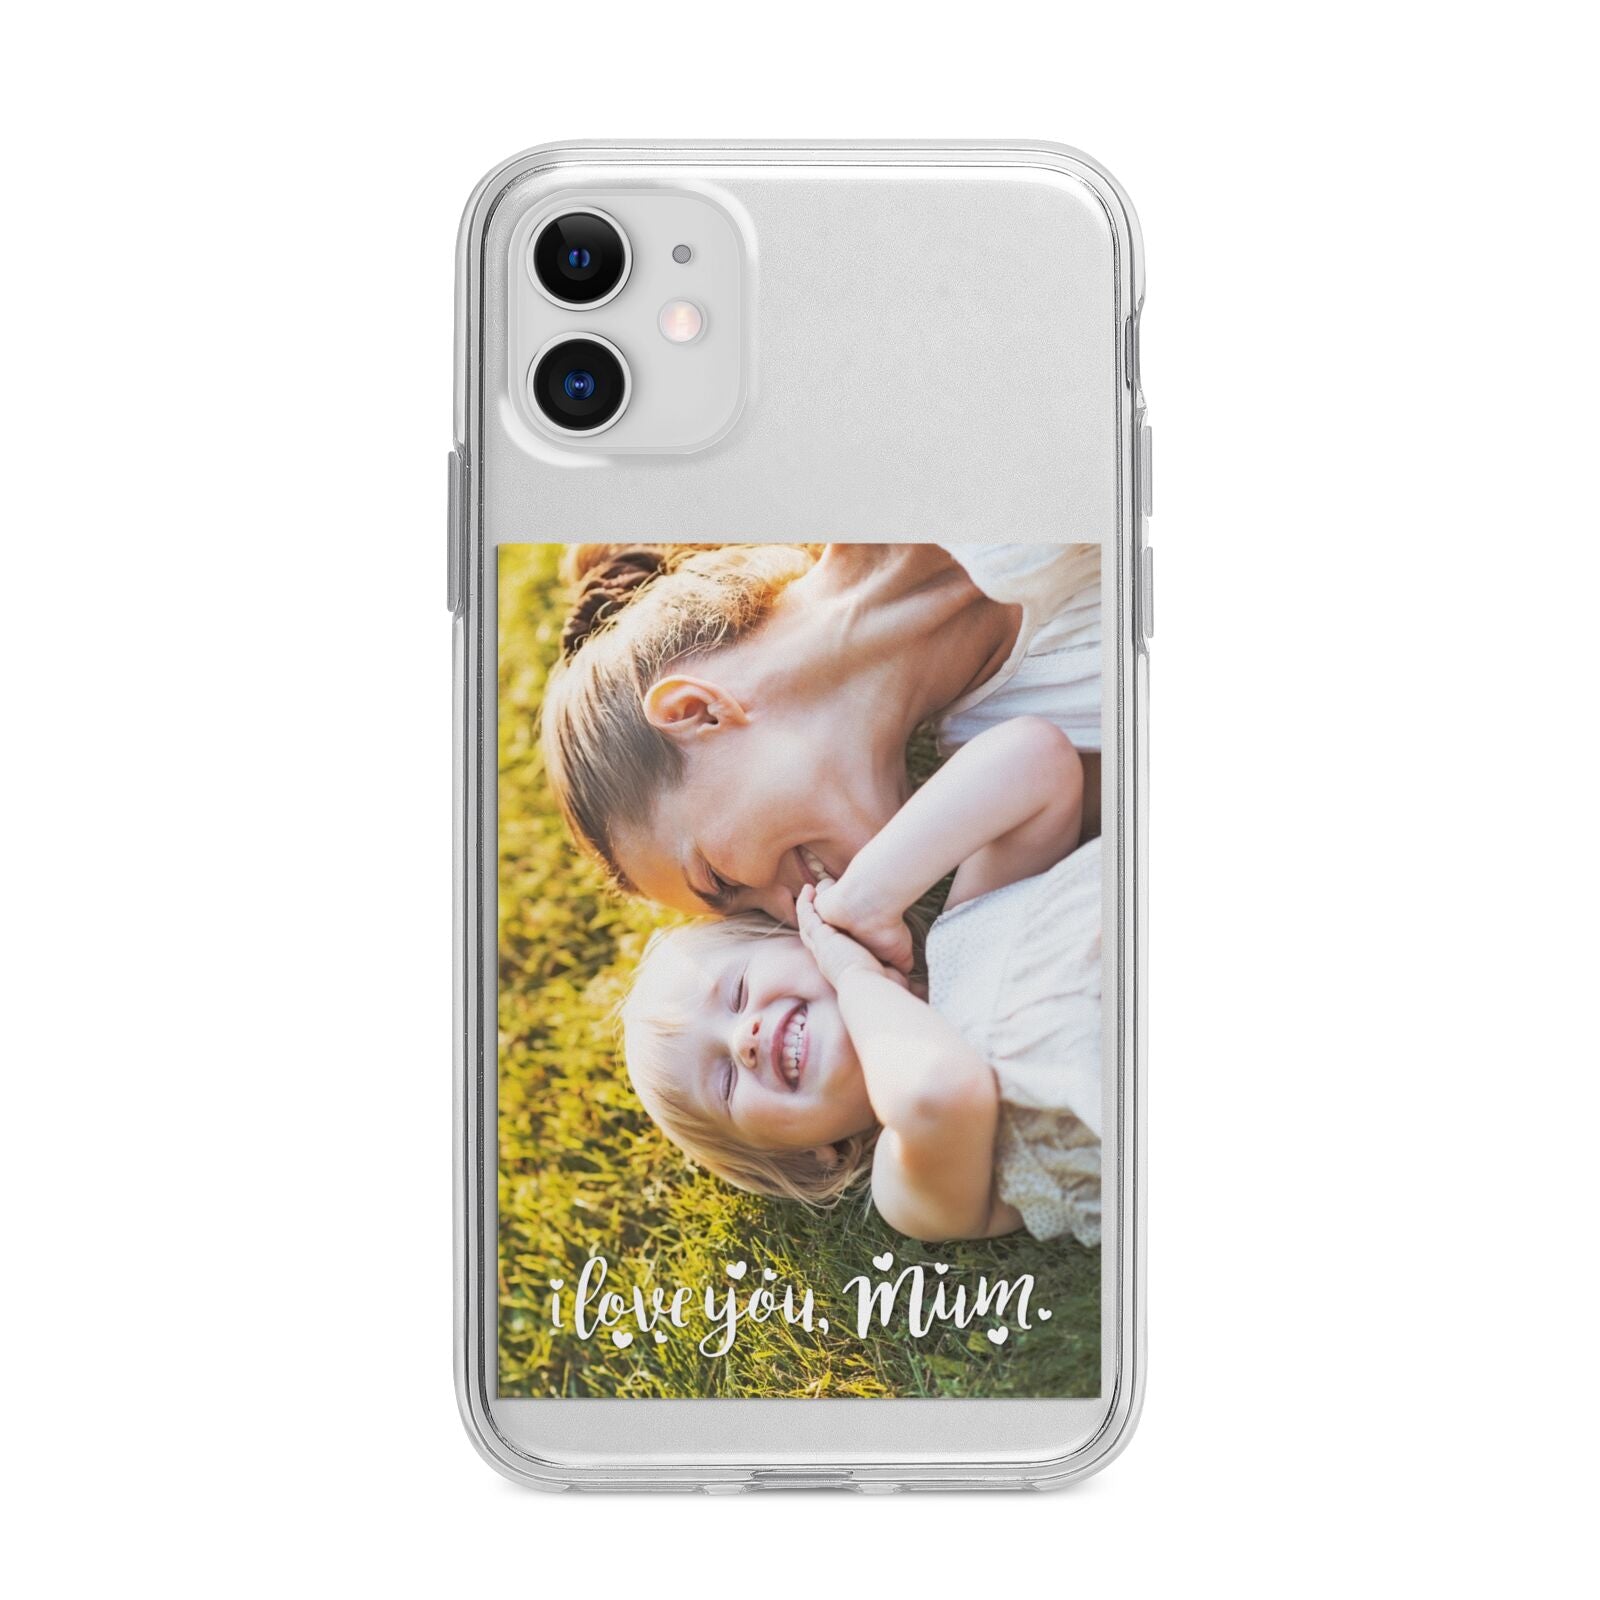 Love You Mum Photo Upload Apple iPhone 11 in White with Bumper Case